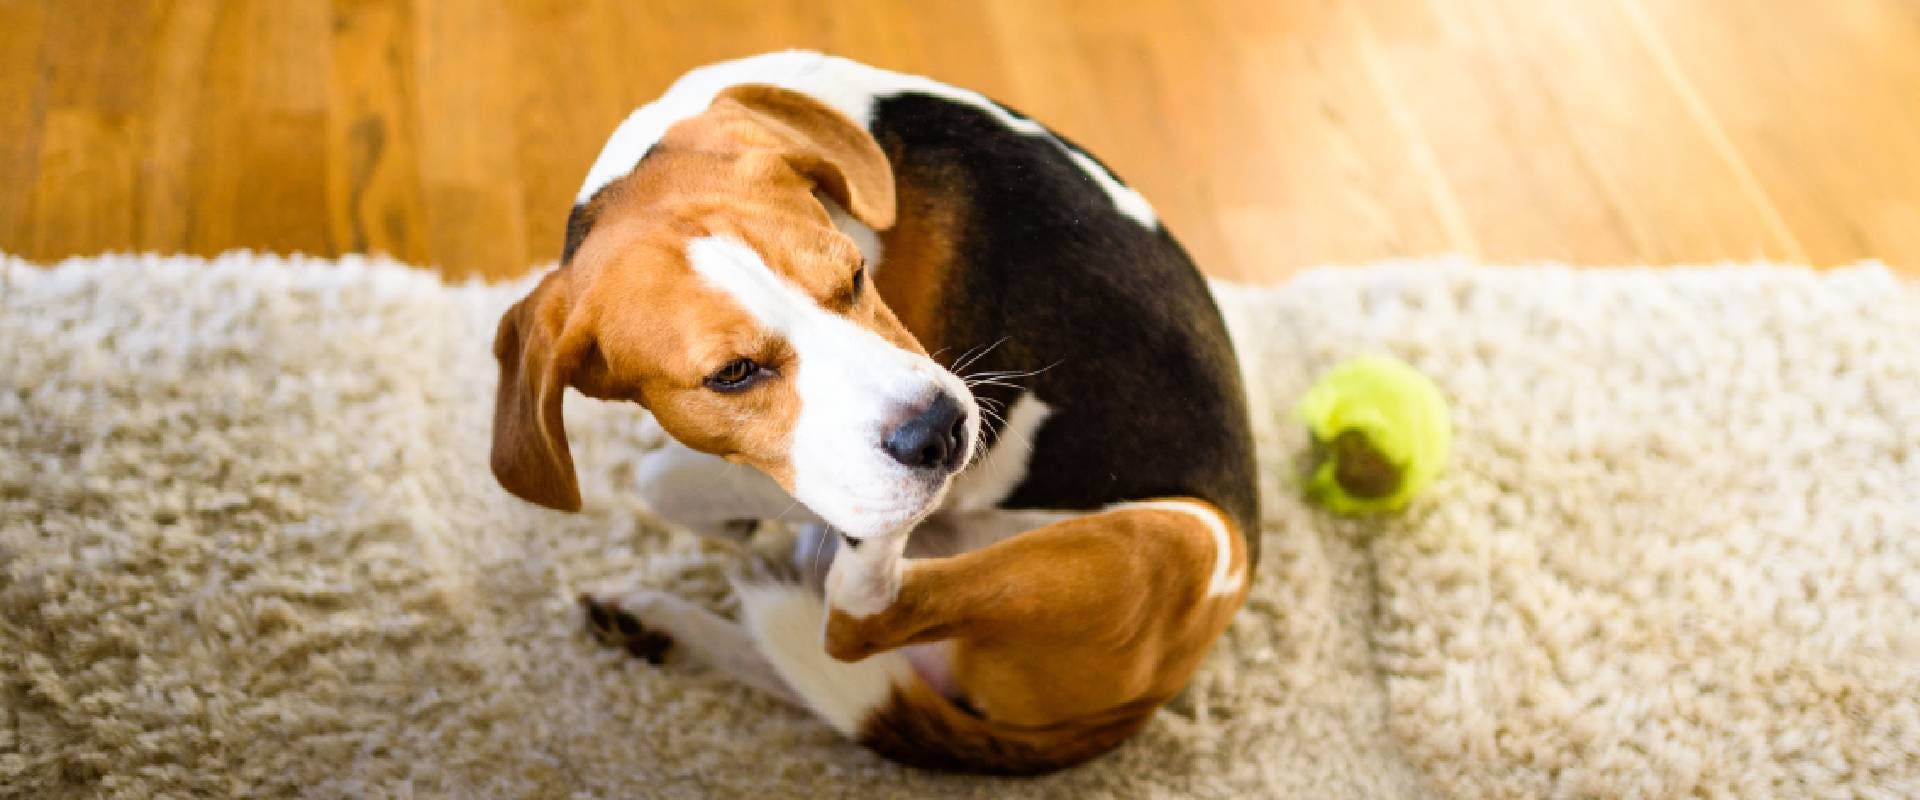 Beagle scratching themselves on a rug